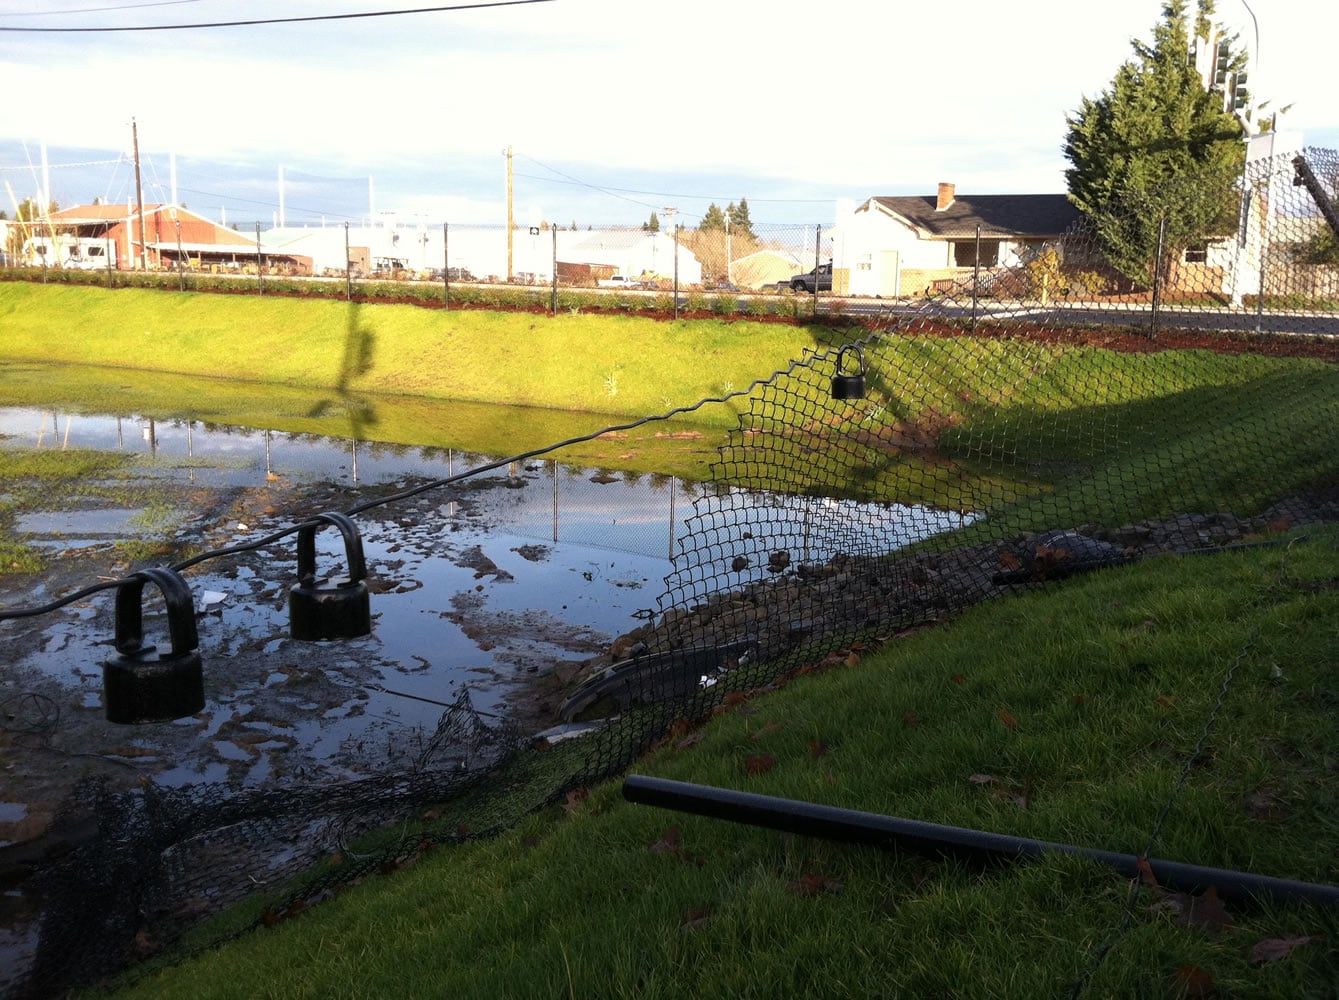 A car knocked down a section of a recently installed fence in the Salmon Creek area sometime around Dec.